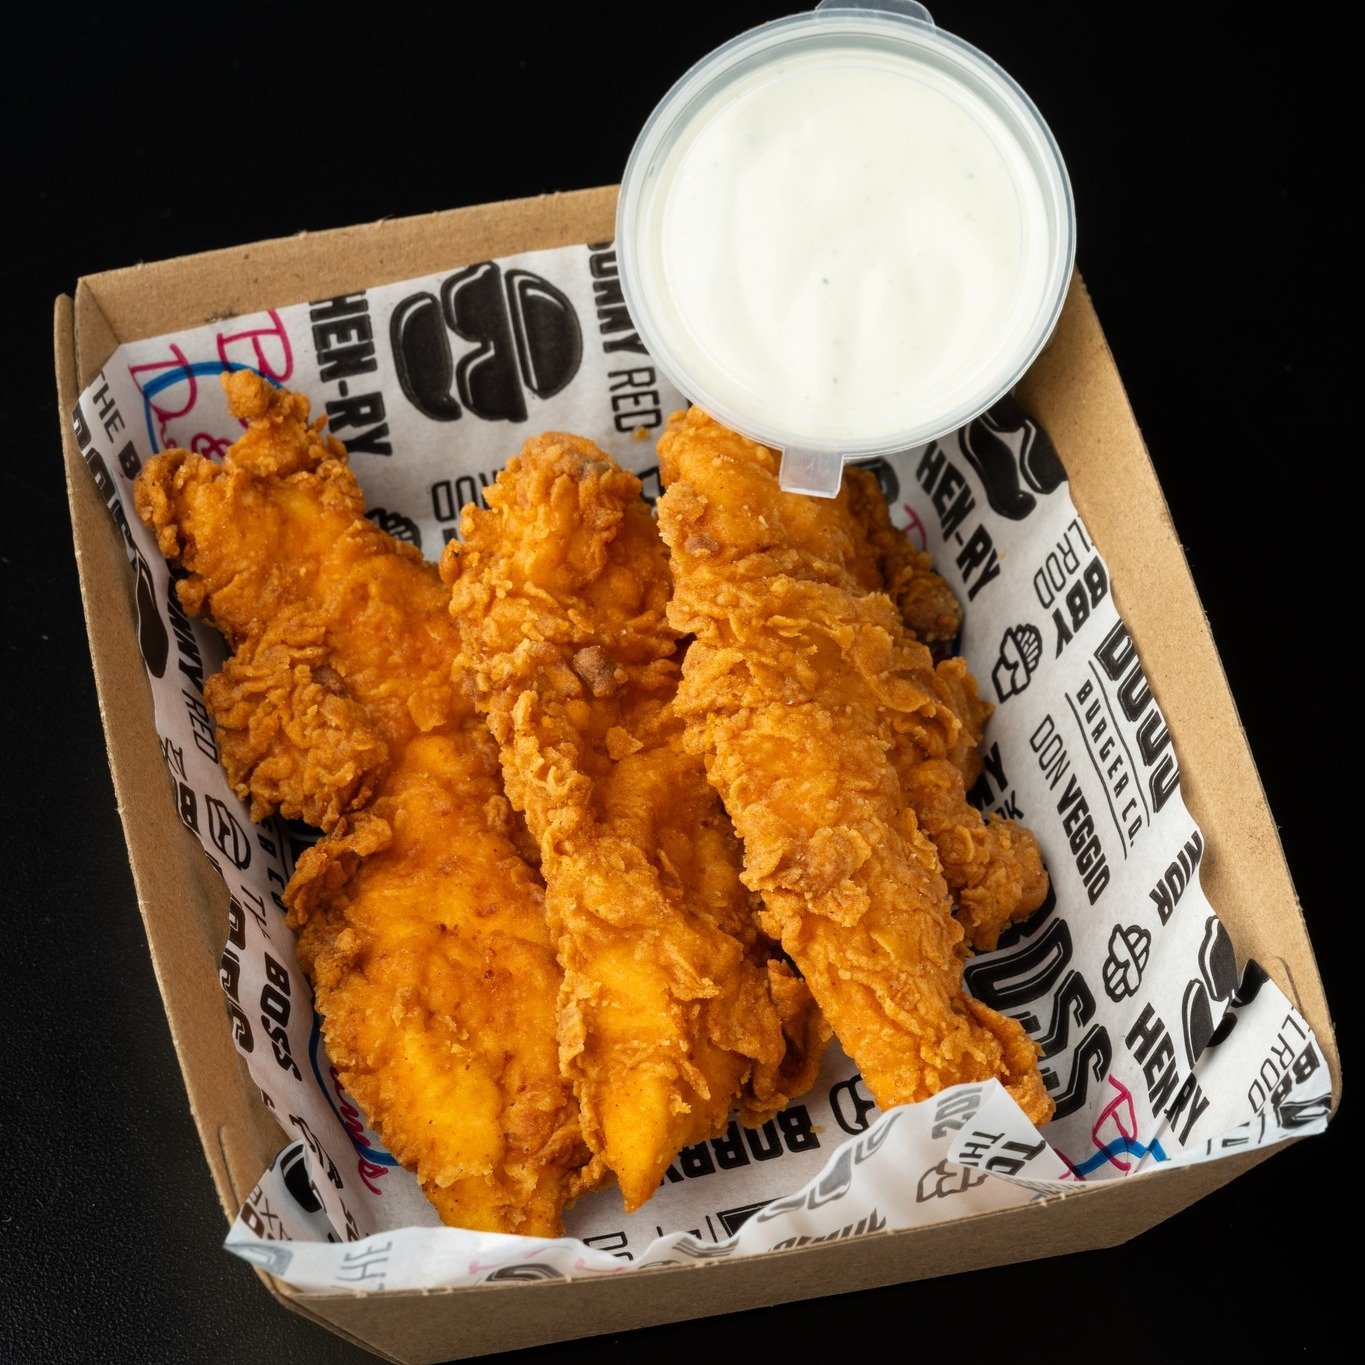 Who needs love when you've got tenders this good? Snack 'em solo or make it a  meal with our sides! It's love at first bite.

&mdash;&gt; Order ahead on our app for pickup or delivery📱
&mdash;&gt; Give us a call 📞
&mdash;&gt; Get it delivered via d